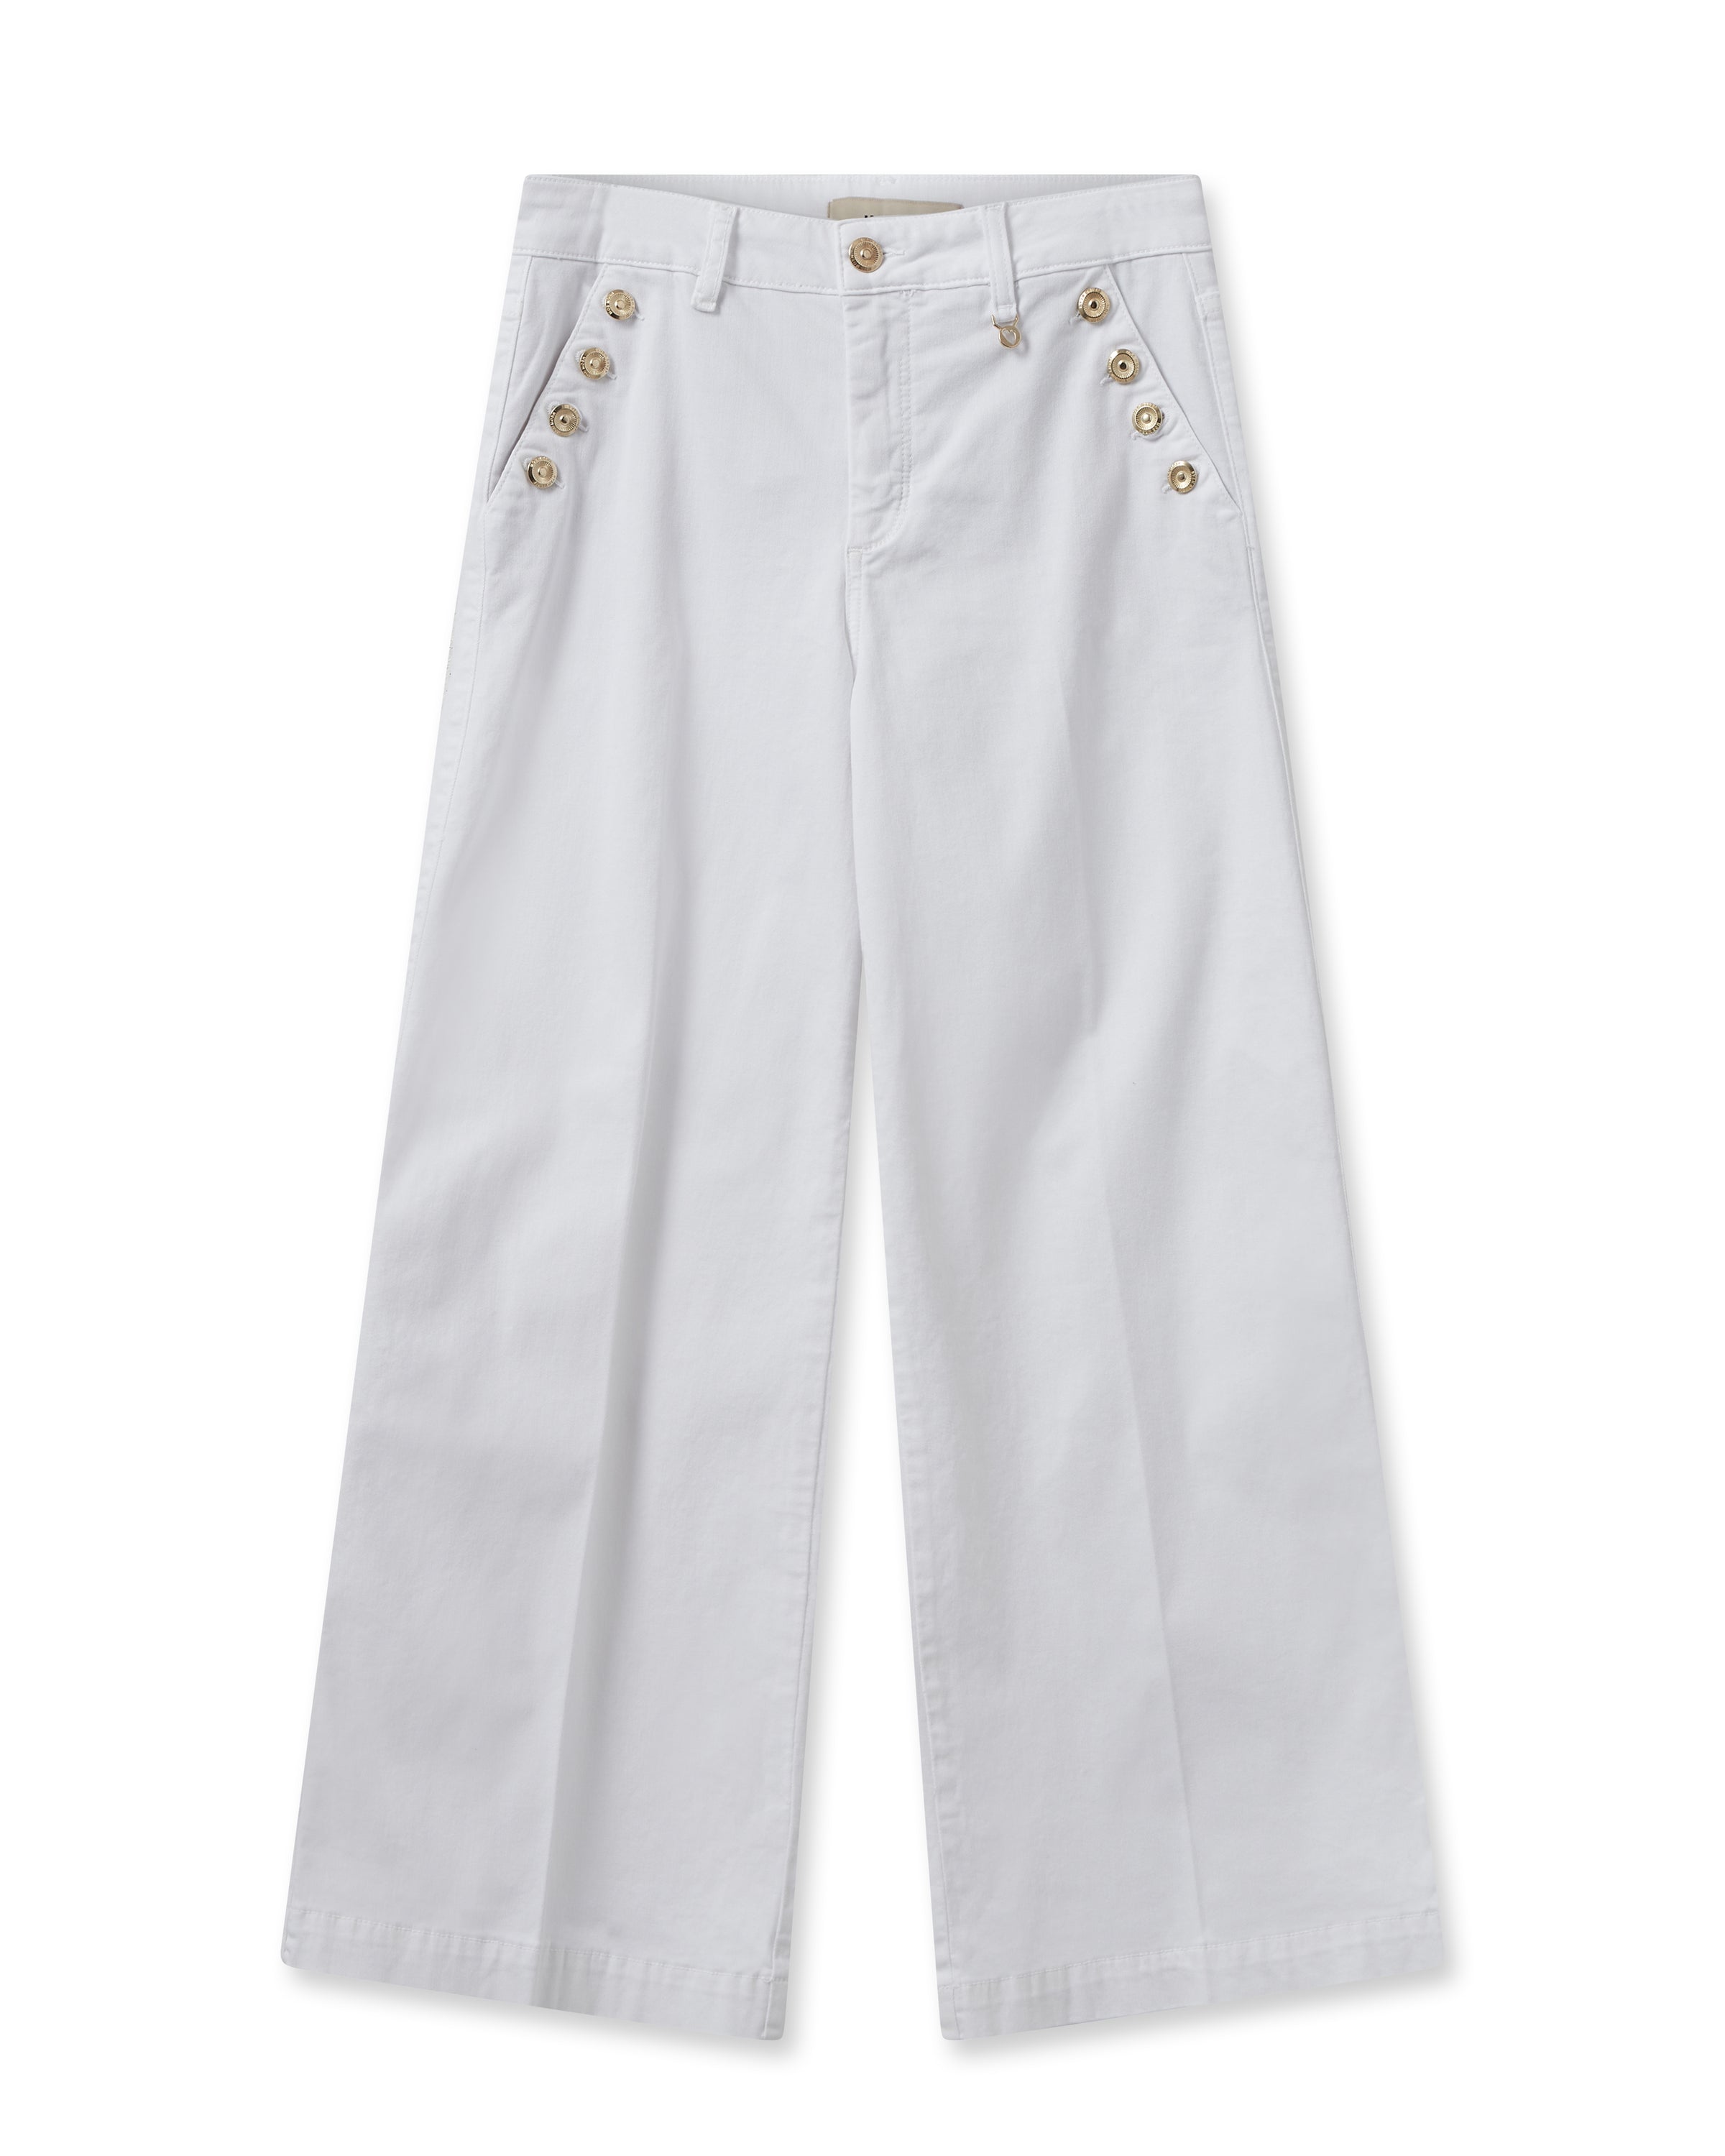 White crop wide leg jeans with gold button detailing at the pockets